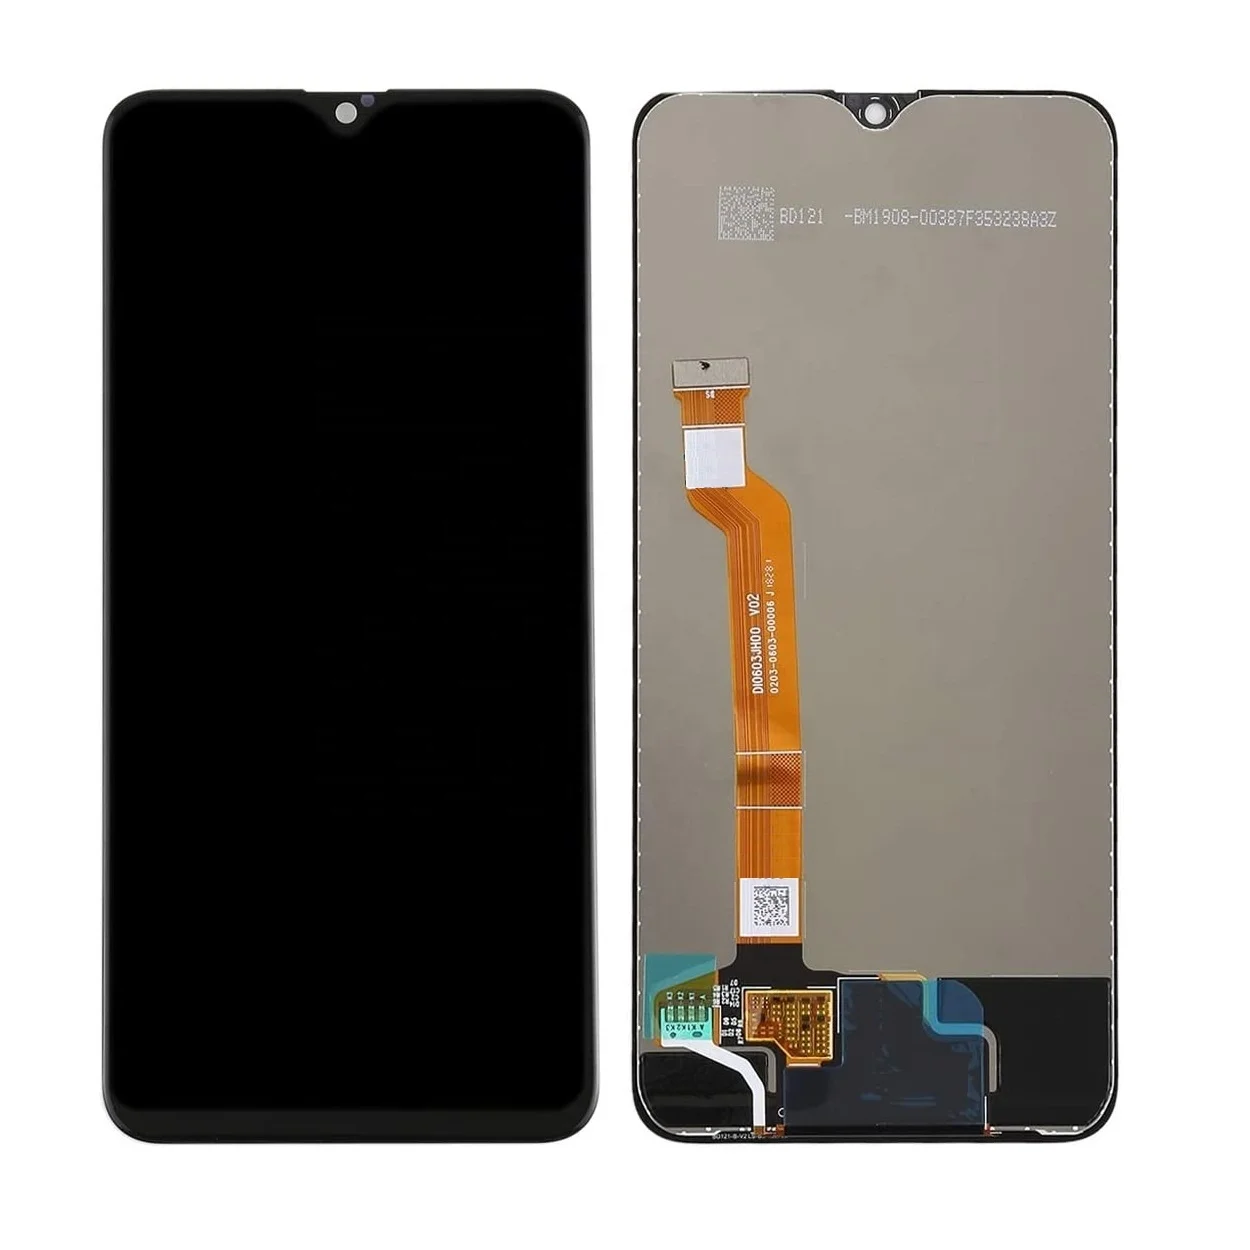 

For OPPO F9 LCD Touch Screen Replacement  LCD Display Assembly Phone Parts Repairing for OPPO F9 Pro A7X Realme U1, Black